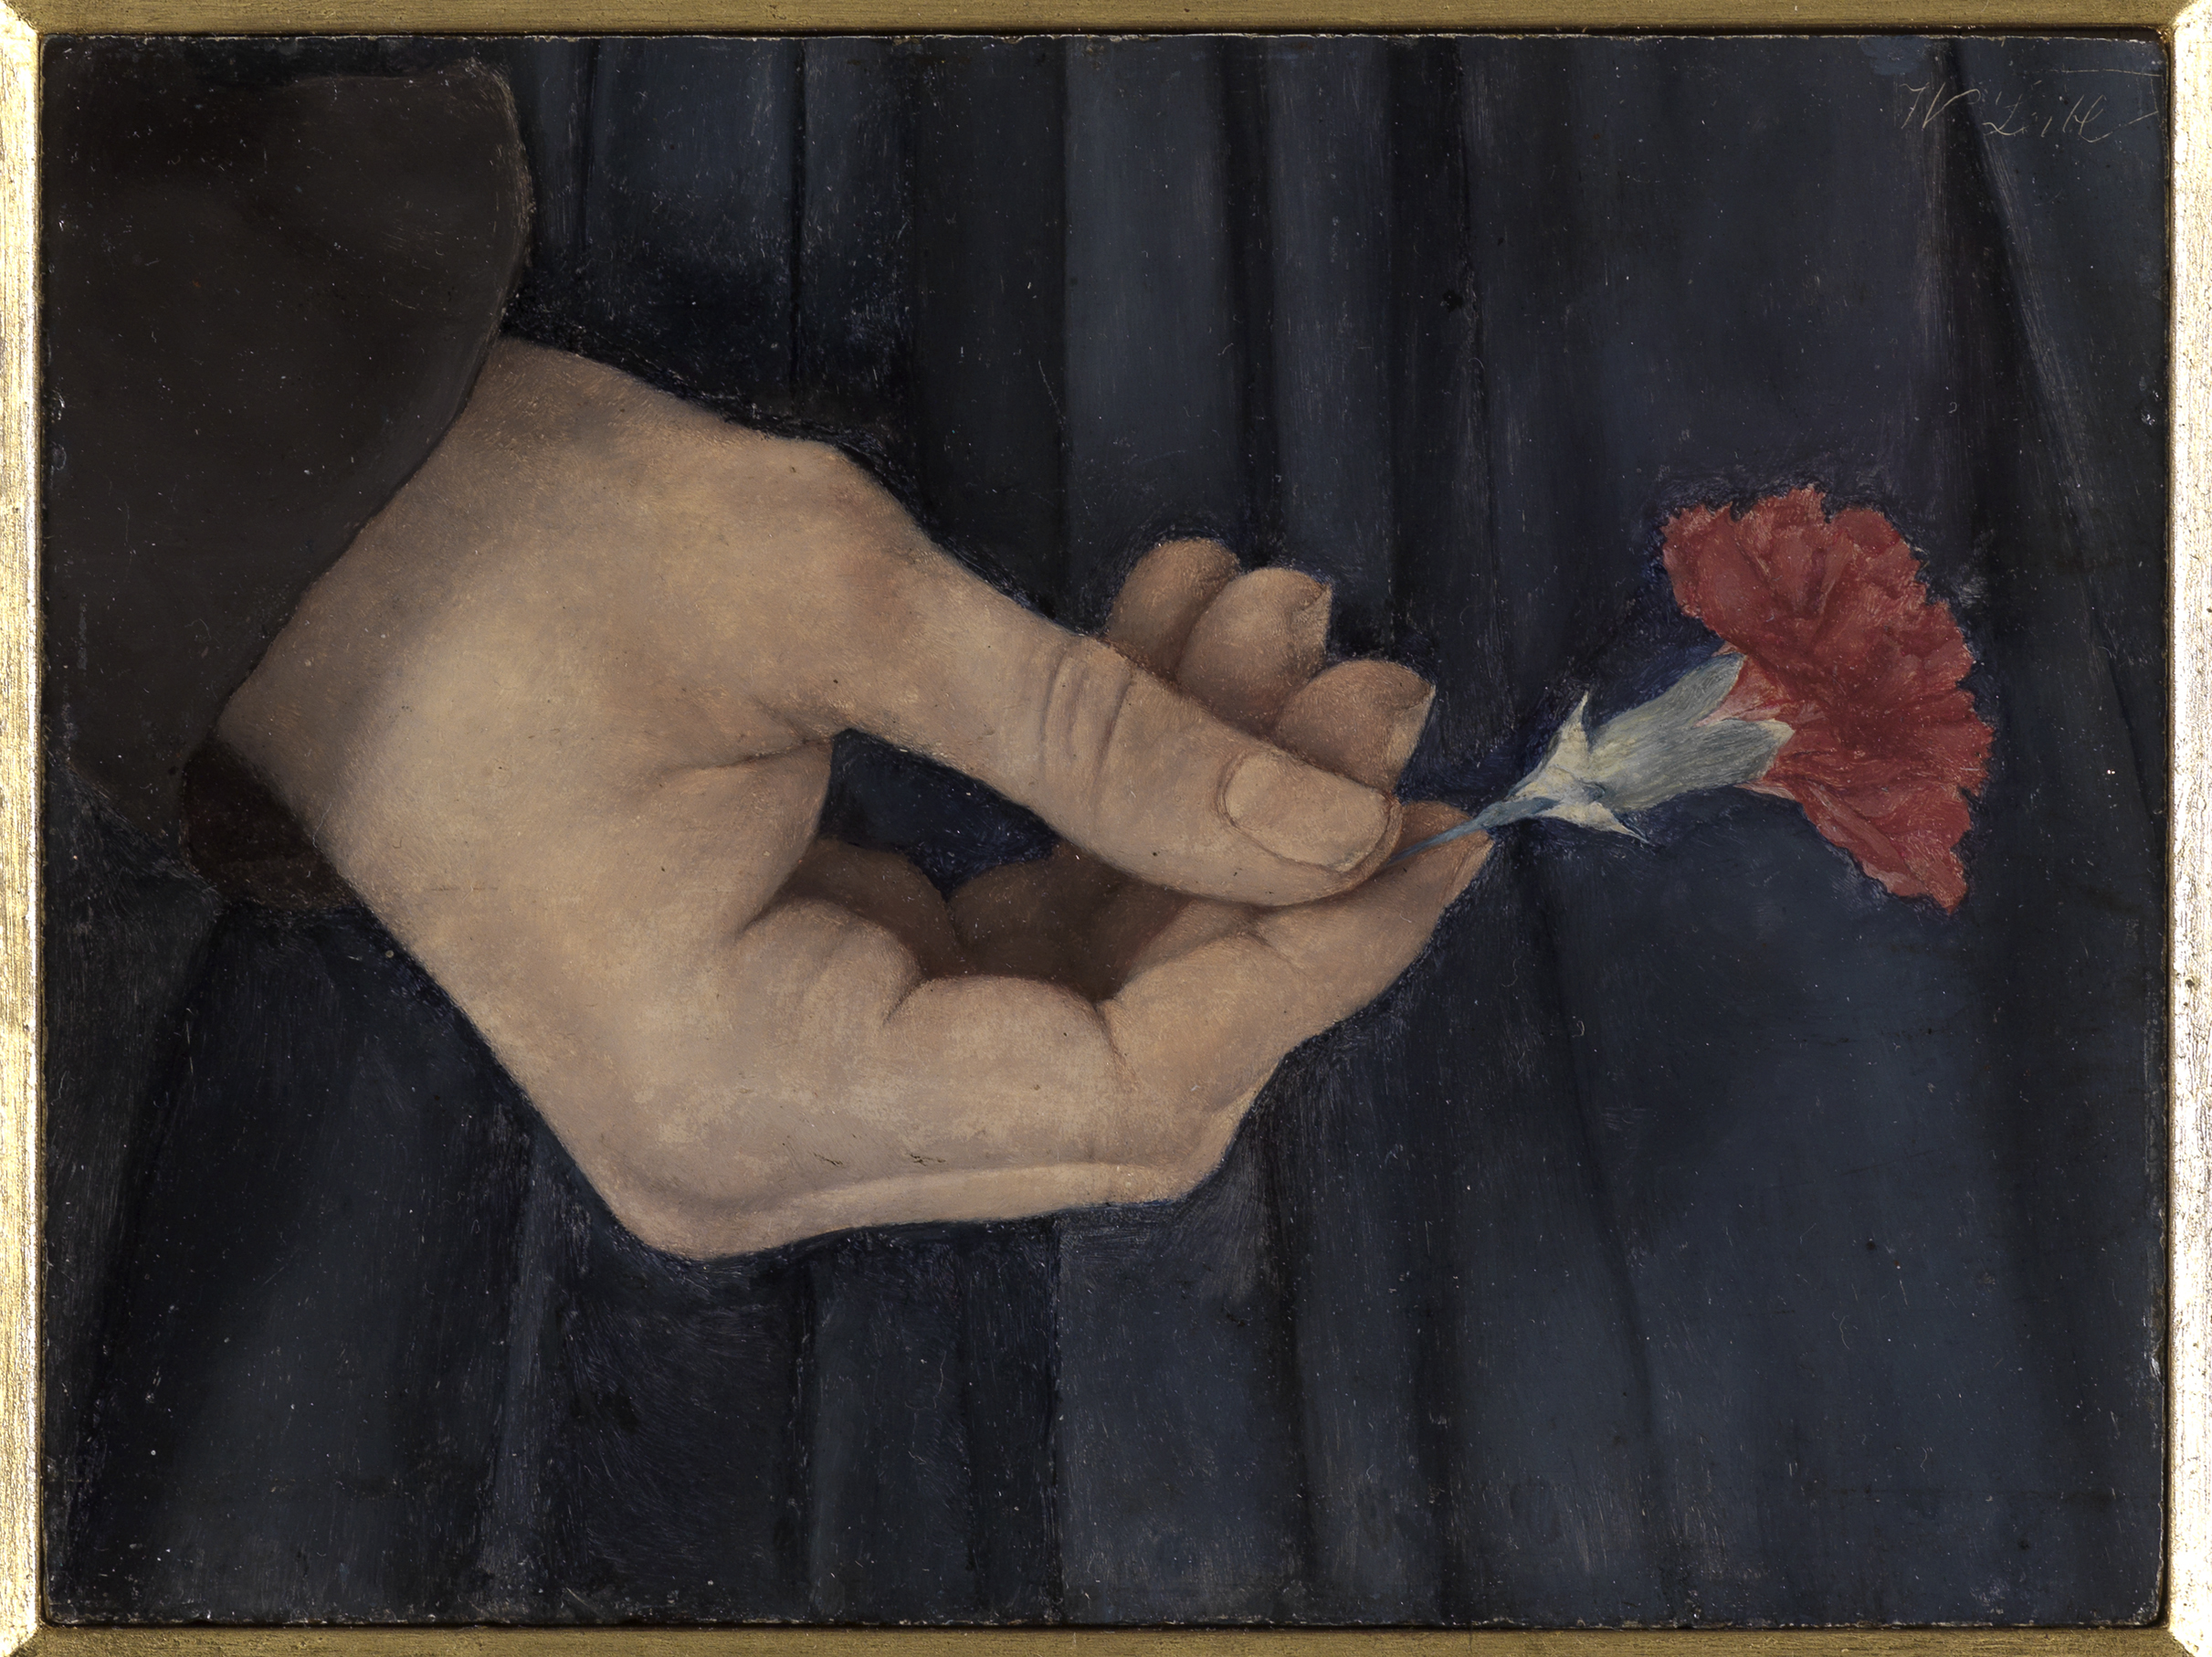 Right Hand of the Girl with Carnation by Wilhelm Leibl - 1880 - 13 x 17.5 cm Staatliche Kunsthalle Karlsruhe